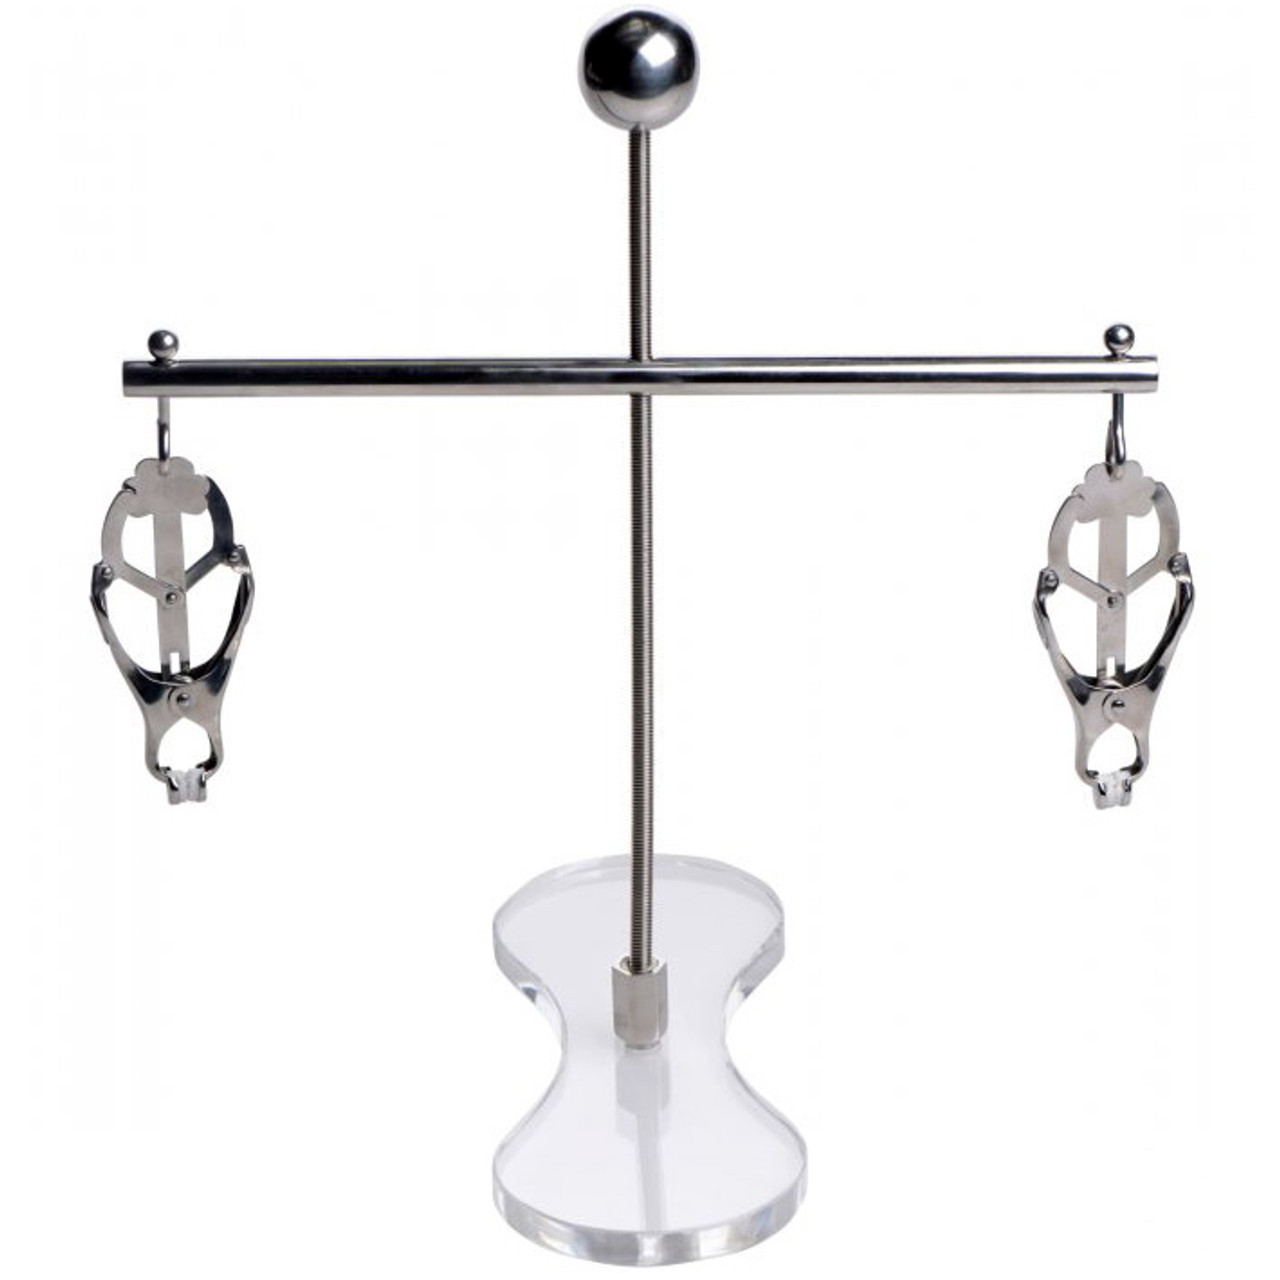 Buy The Tower of Pain Stainless Steel Clover Clamp Nipple Stretcher Tit Torture Device